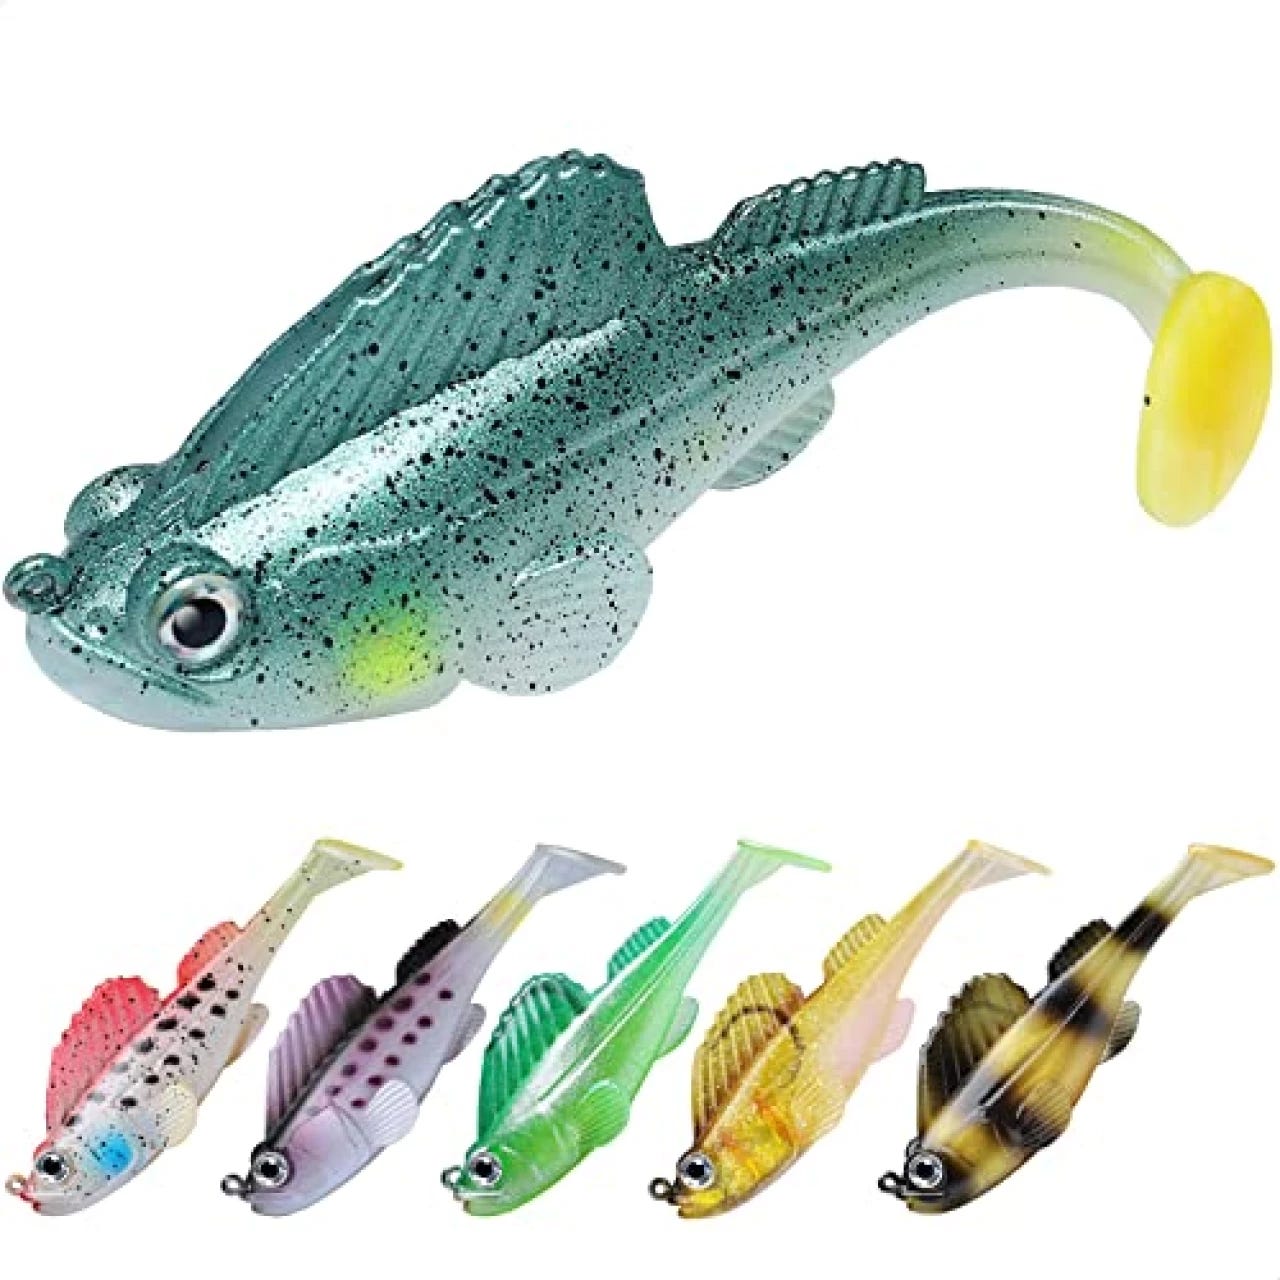 2023 TRUSCEND Fishing Lures Review: Best Bass Trout Gear